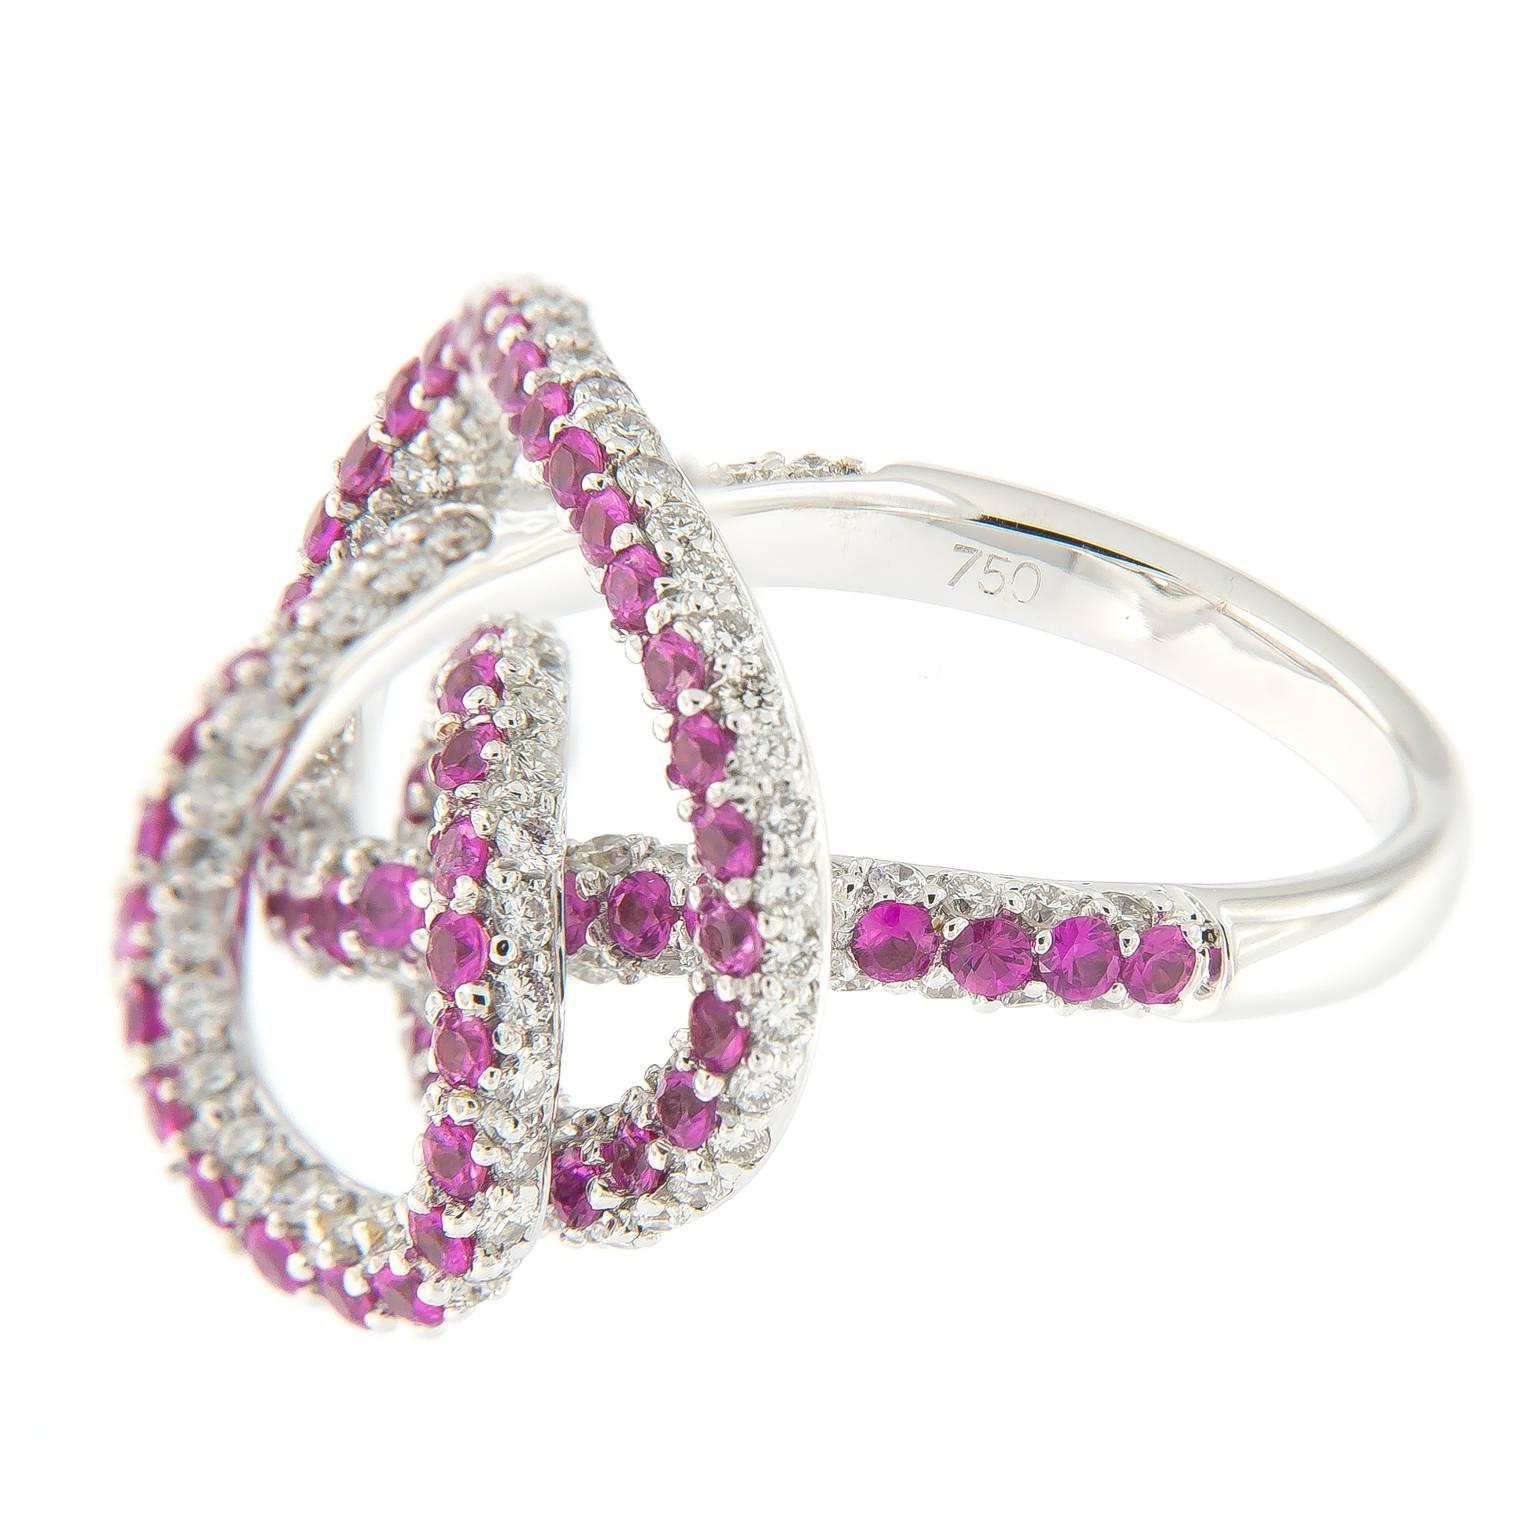 Whimsical 18k white gold large swirl knot ring from Hammerman of New York is compromised of 161 round diamonds and 69 pink sapphires.
Ring Size is 6.25

RBC Diamonds 1.51 cttw
Pink Sapphire 1.62 cttw